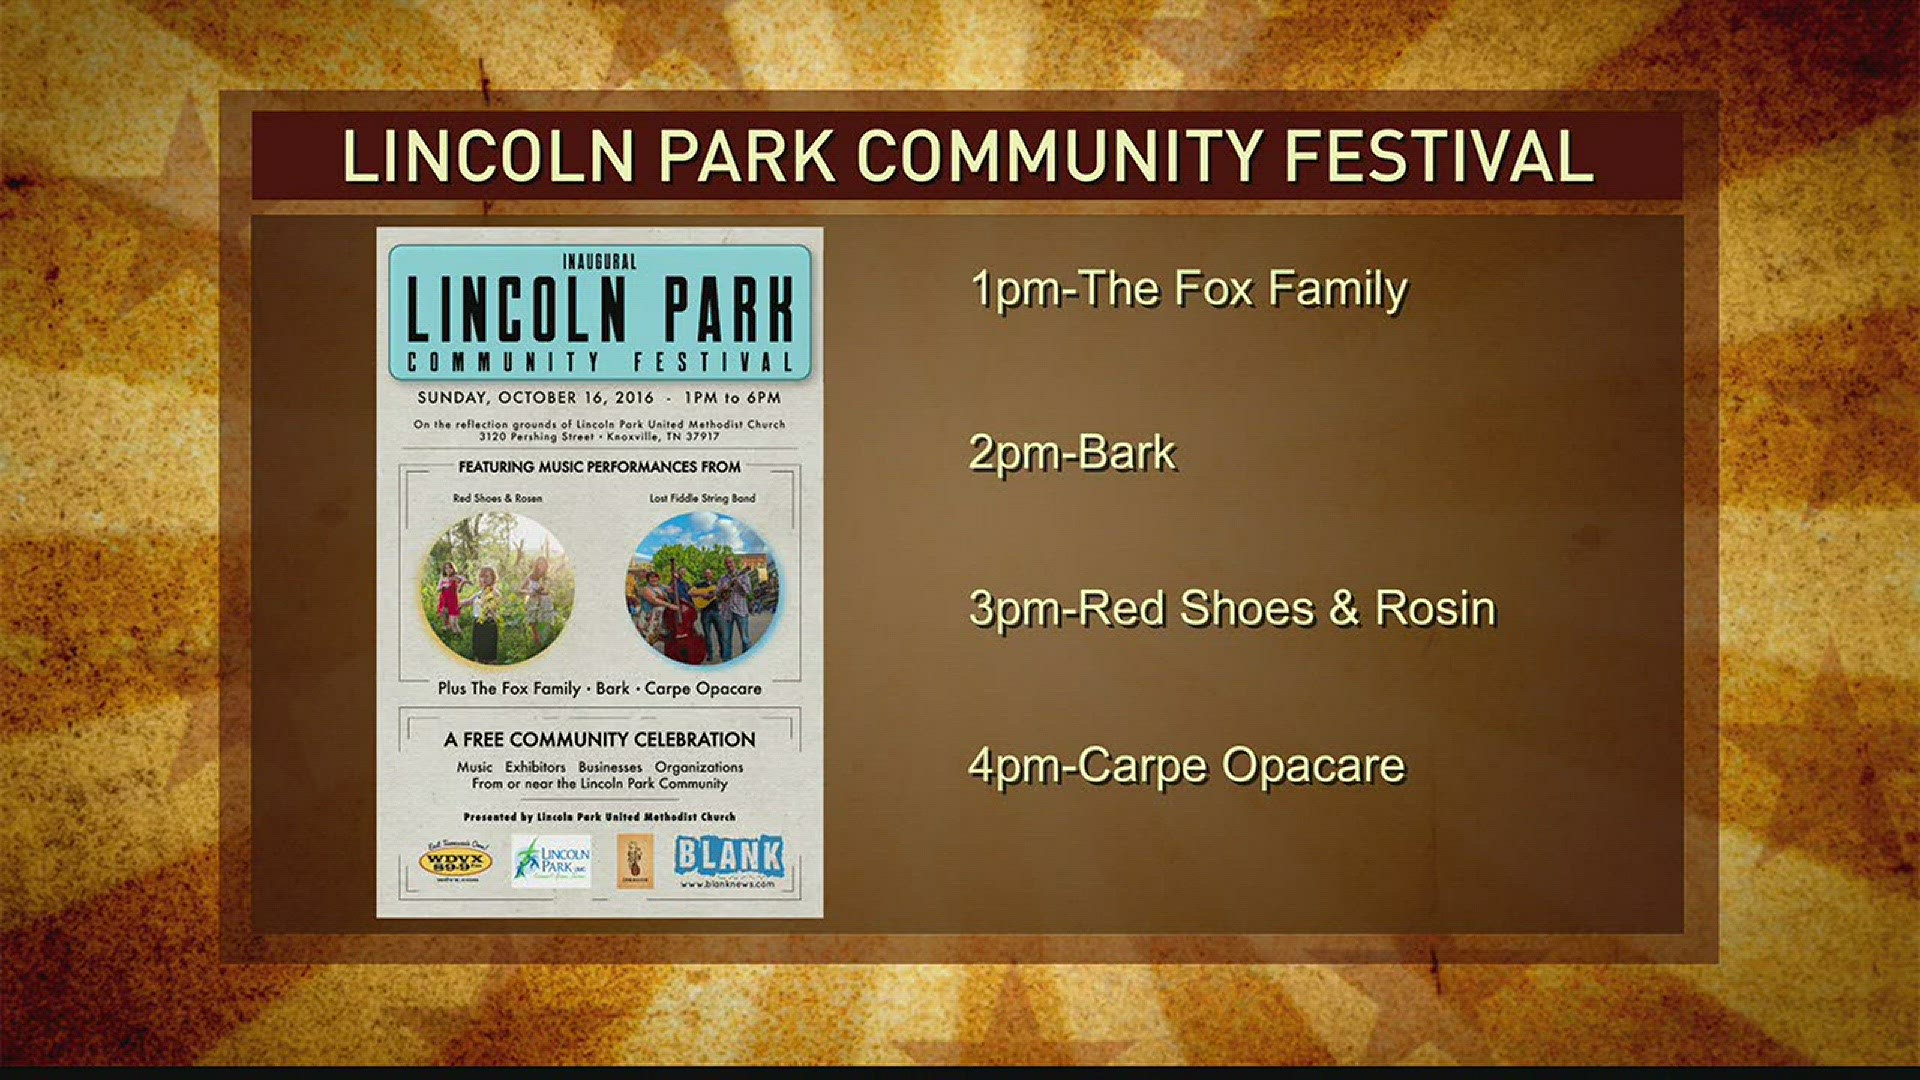 The Lincoln Park community in North Knox County will hold its first ever community festival Sunday, Oct. 16 with live music all day.